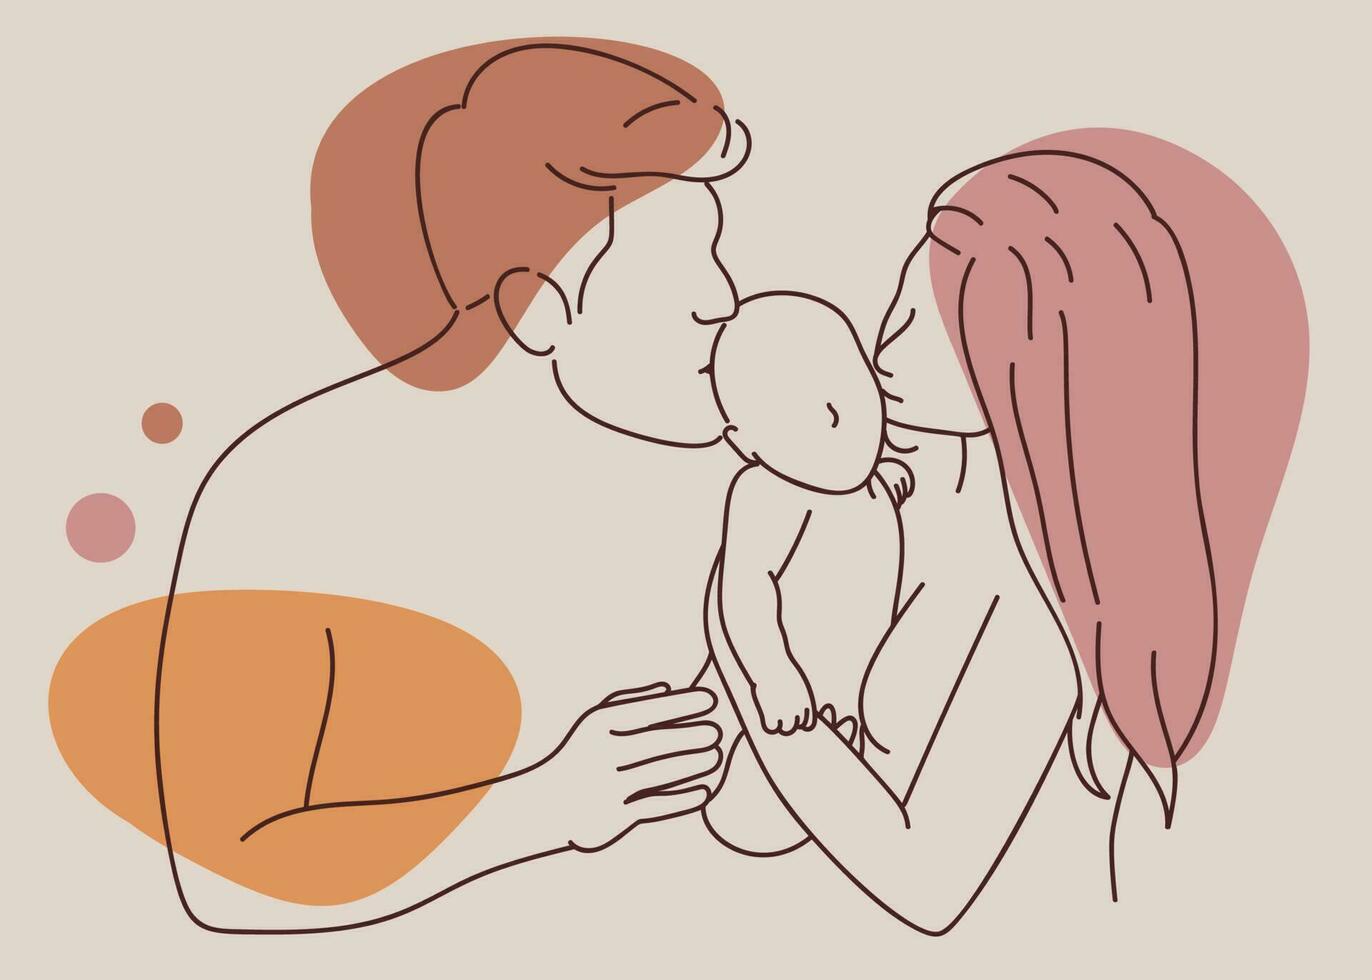 Cute line art vector illustration of a loving couple with a newborn baby.